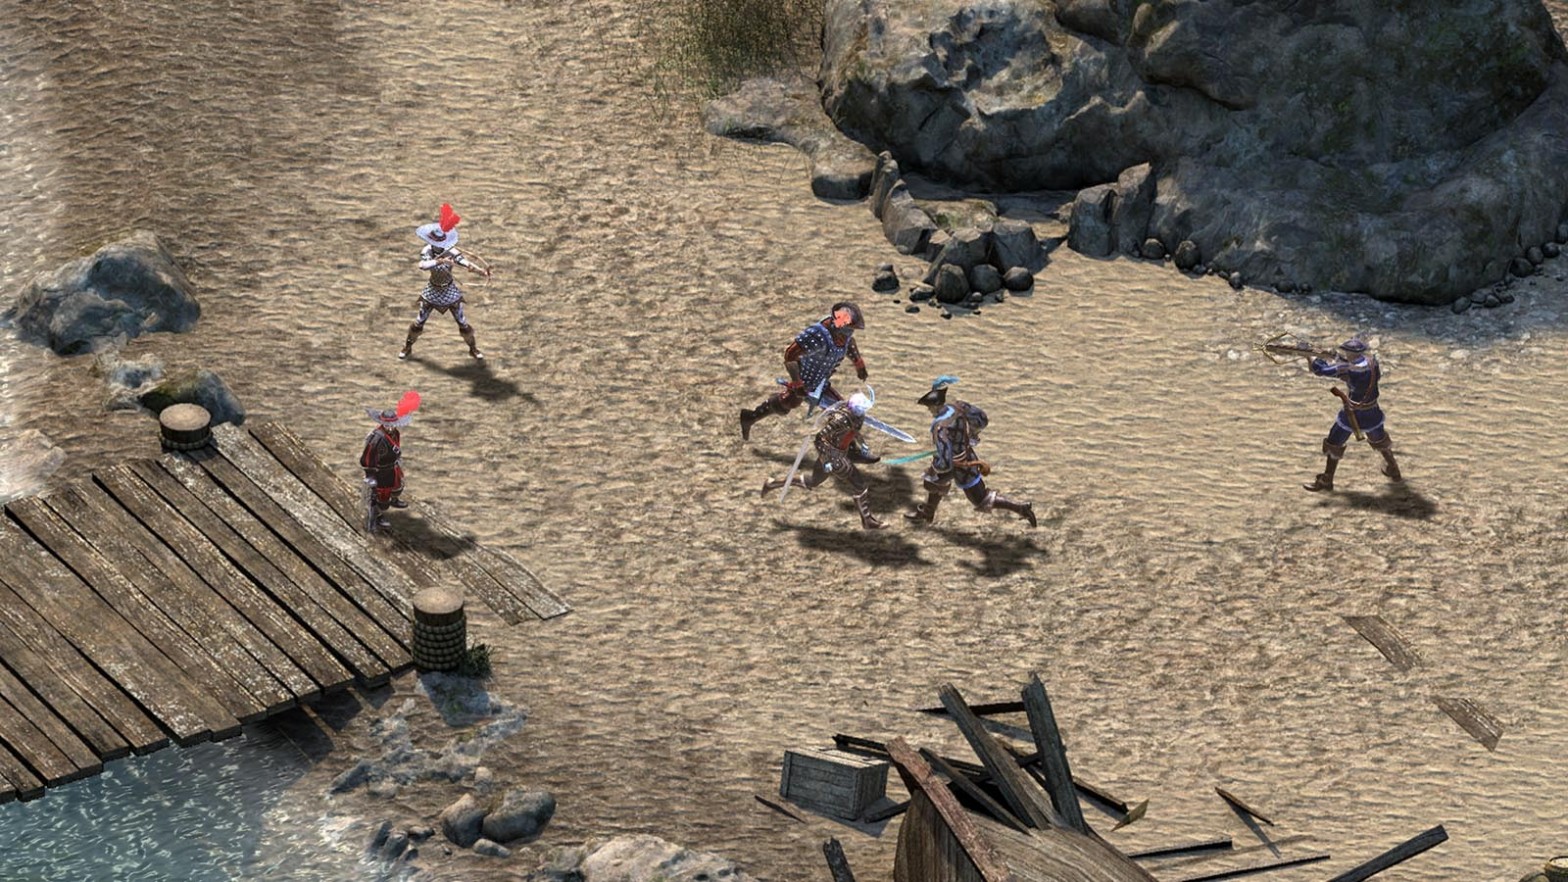 Pillars of Eternity Definitive Edition Free Download